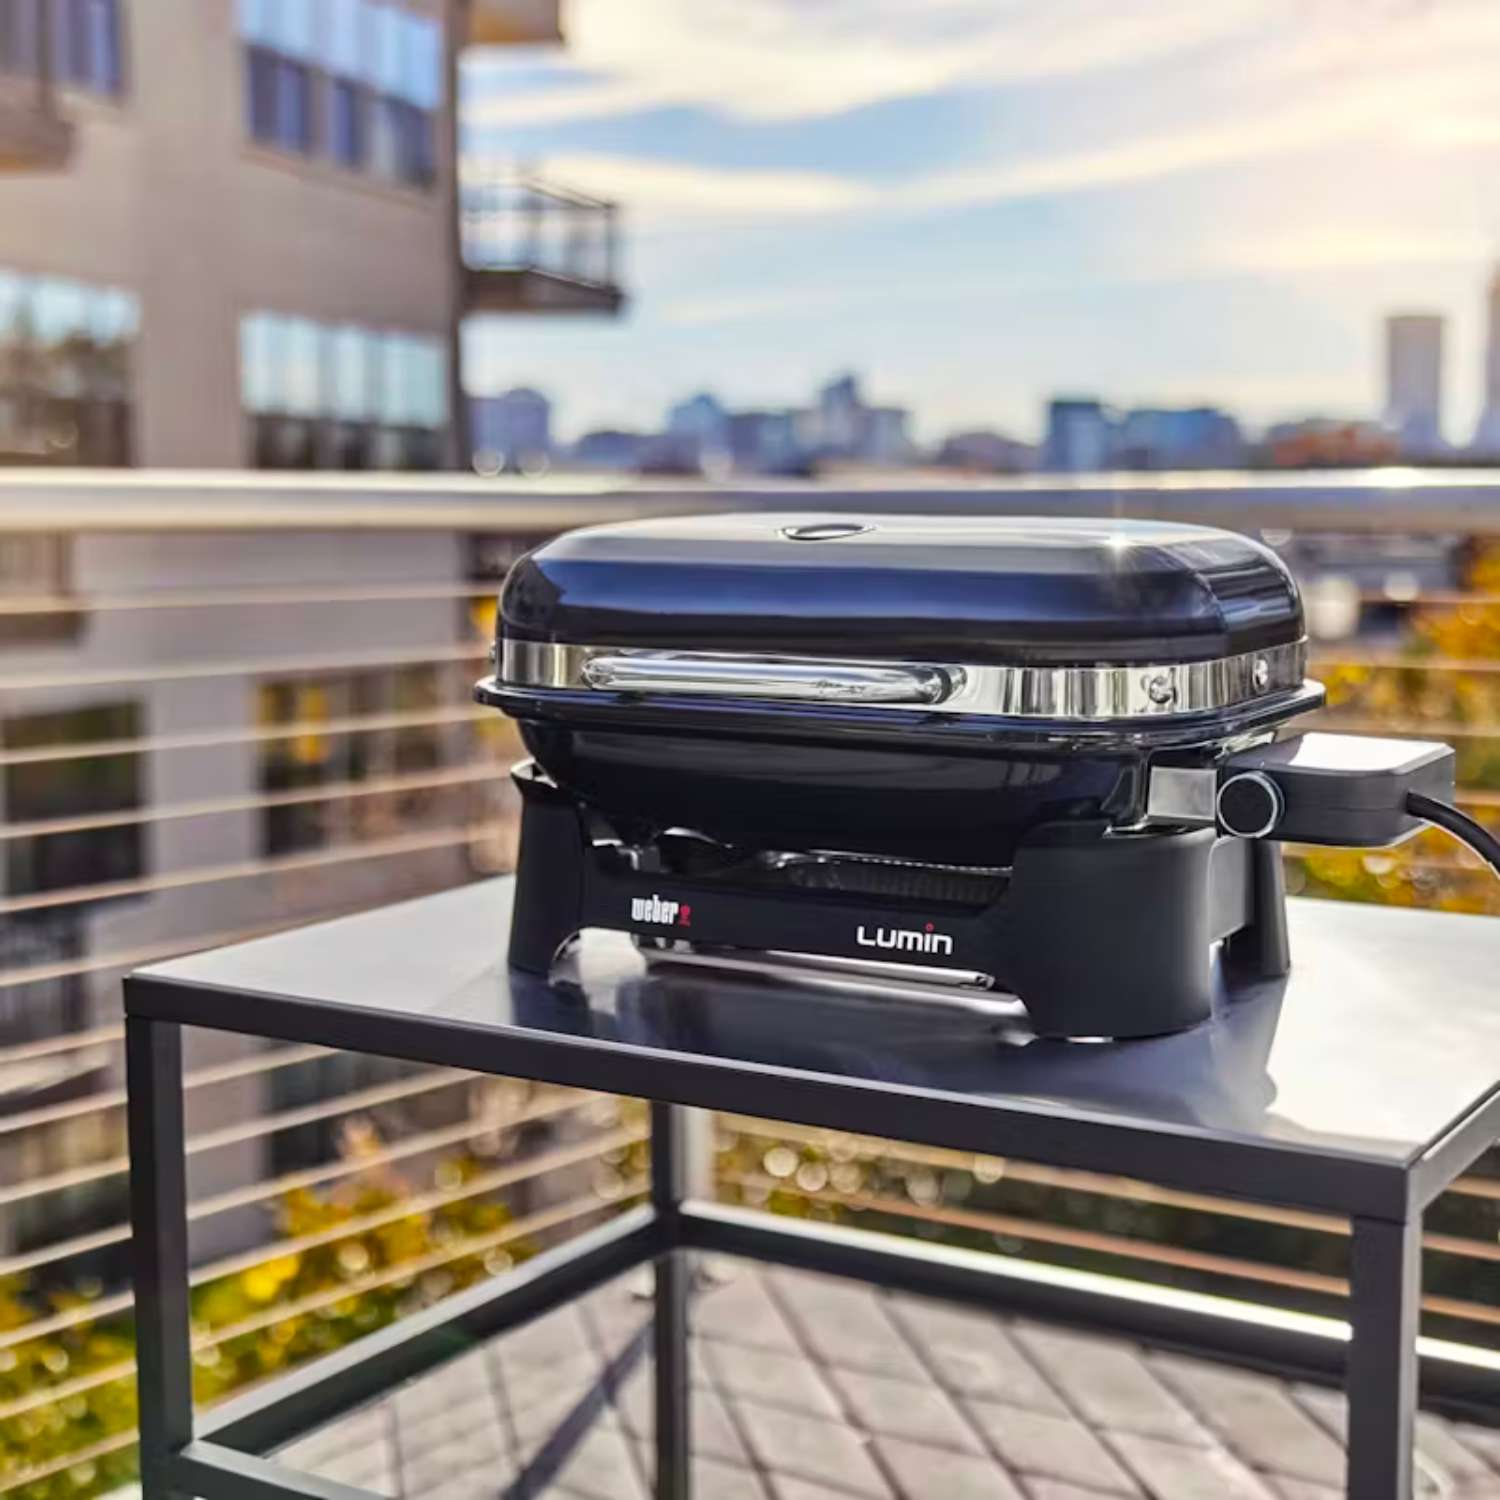 Weber Lumin Compact Grill perfect for outdoor barbecues available at MeatKing.hk3